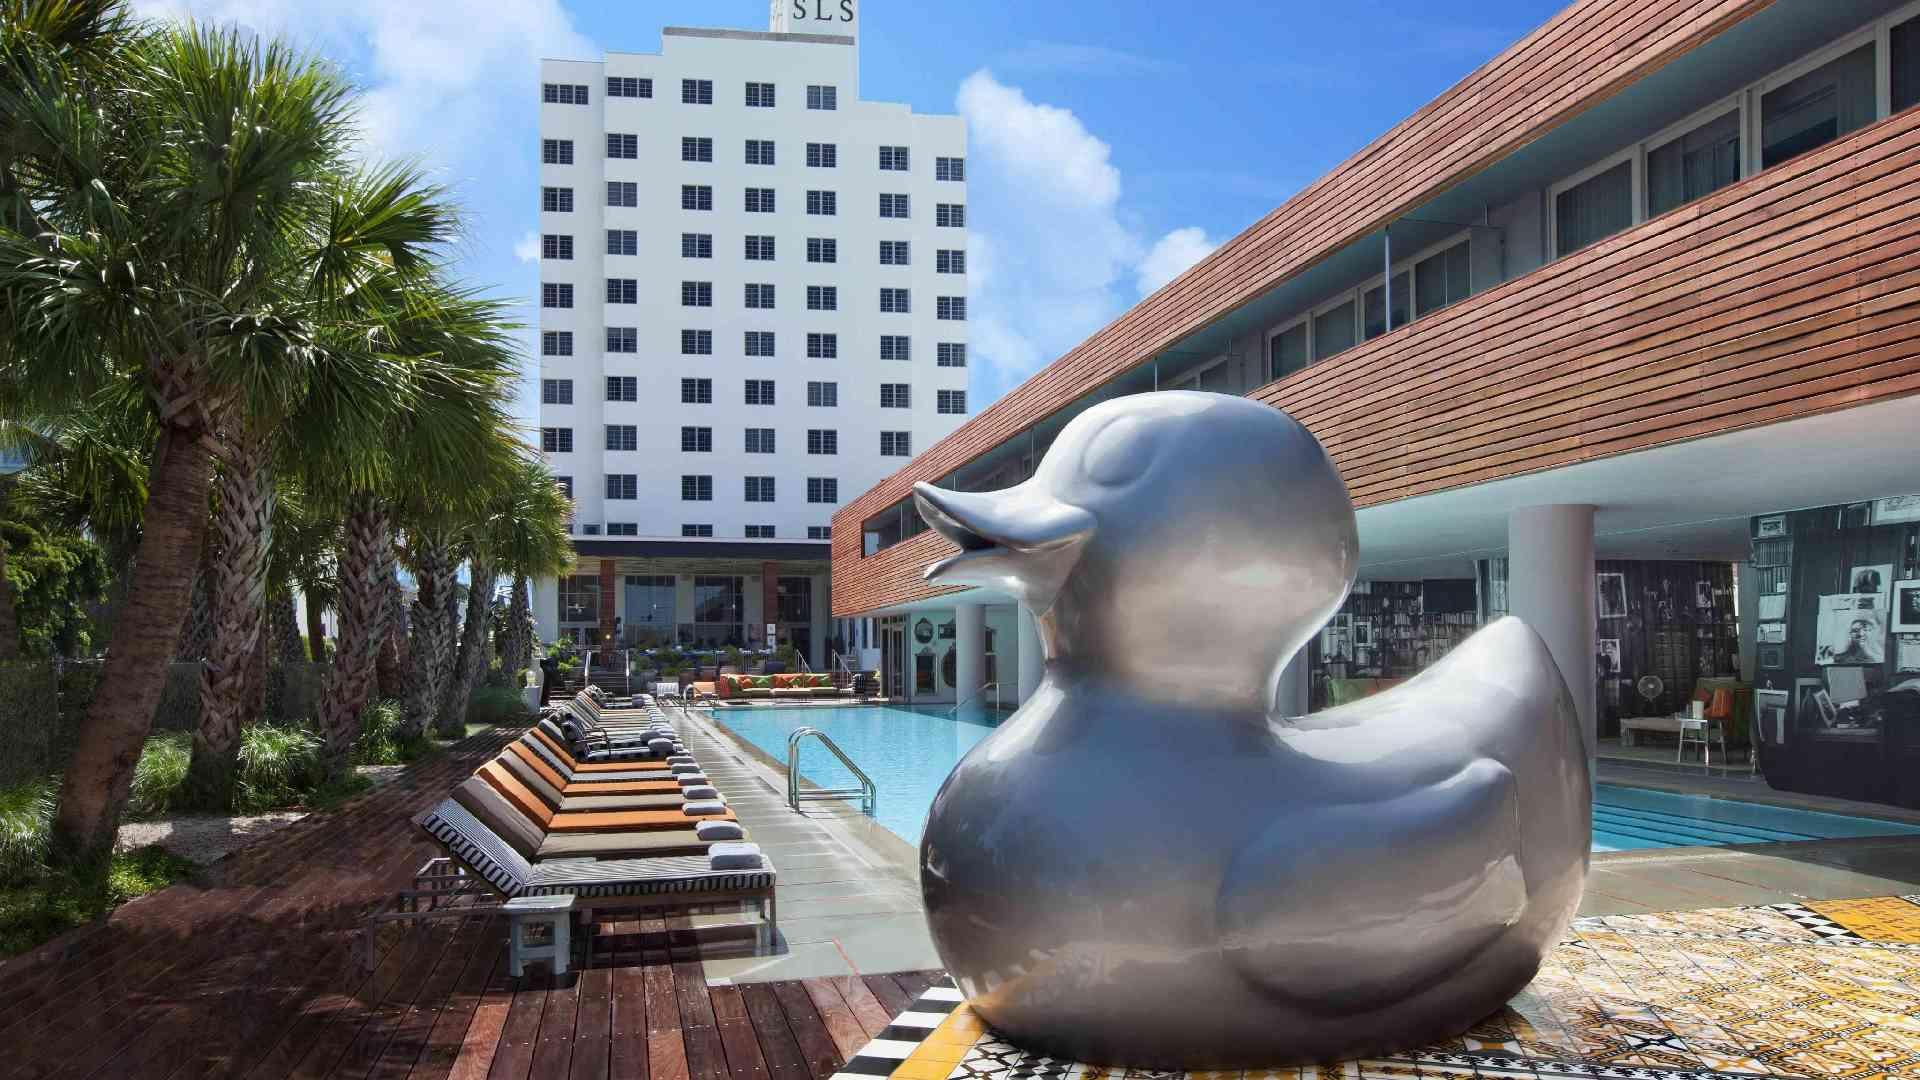 the pool with a large duck statue